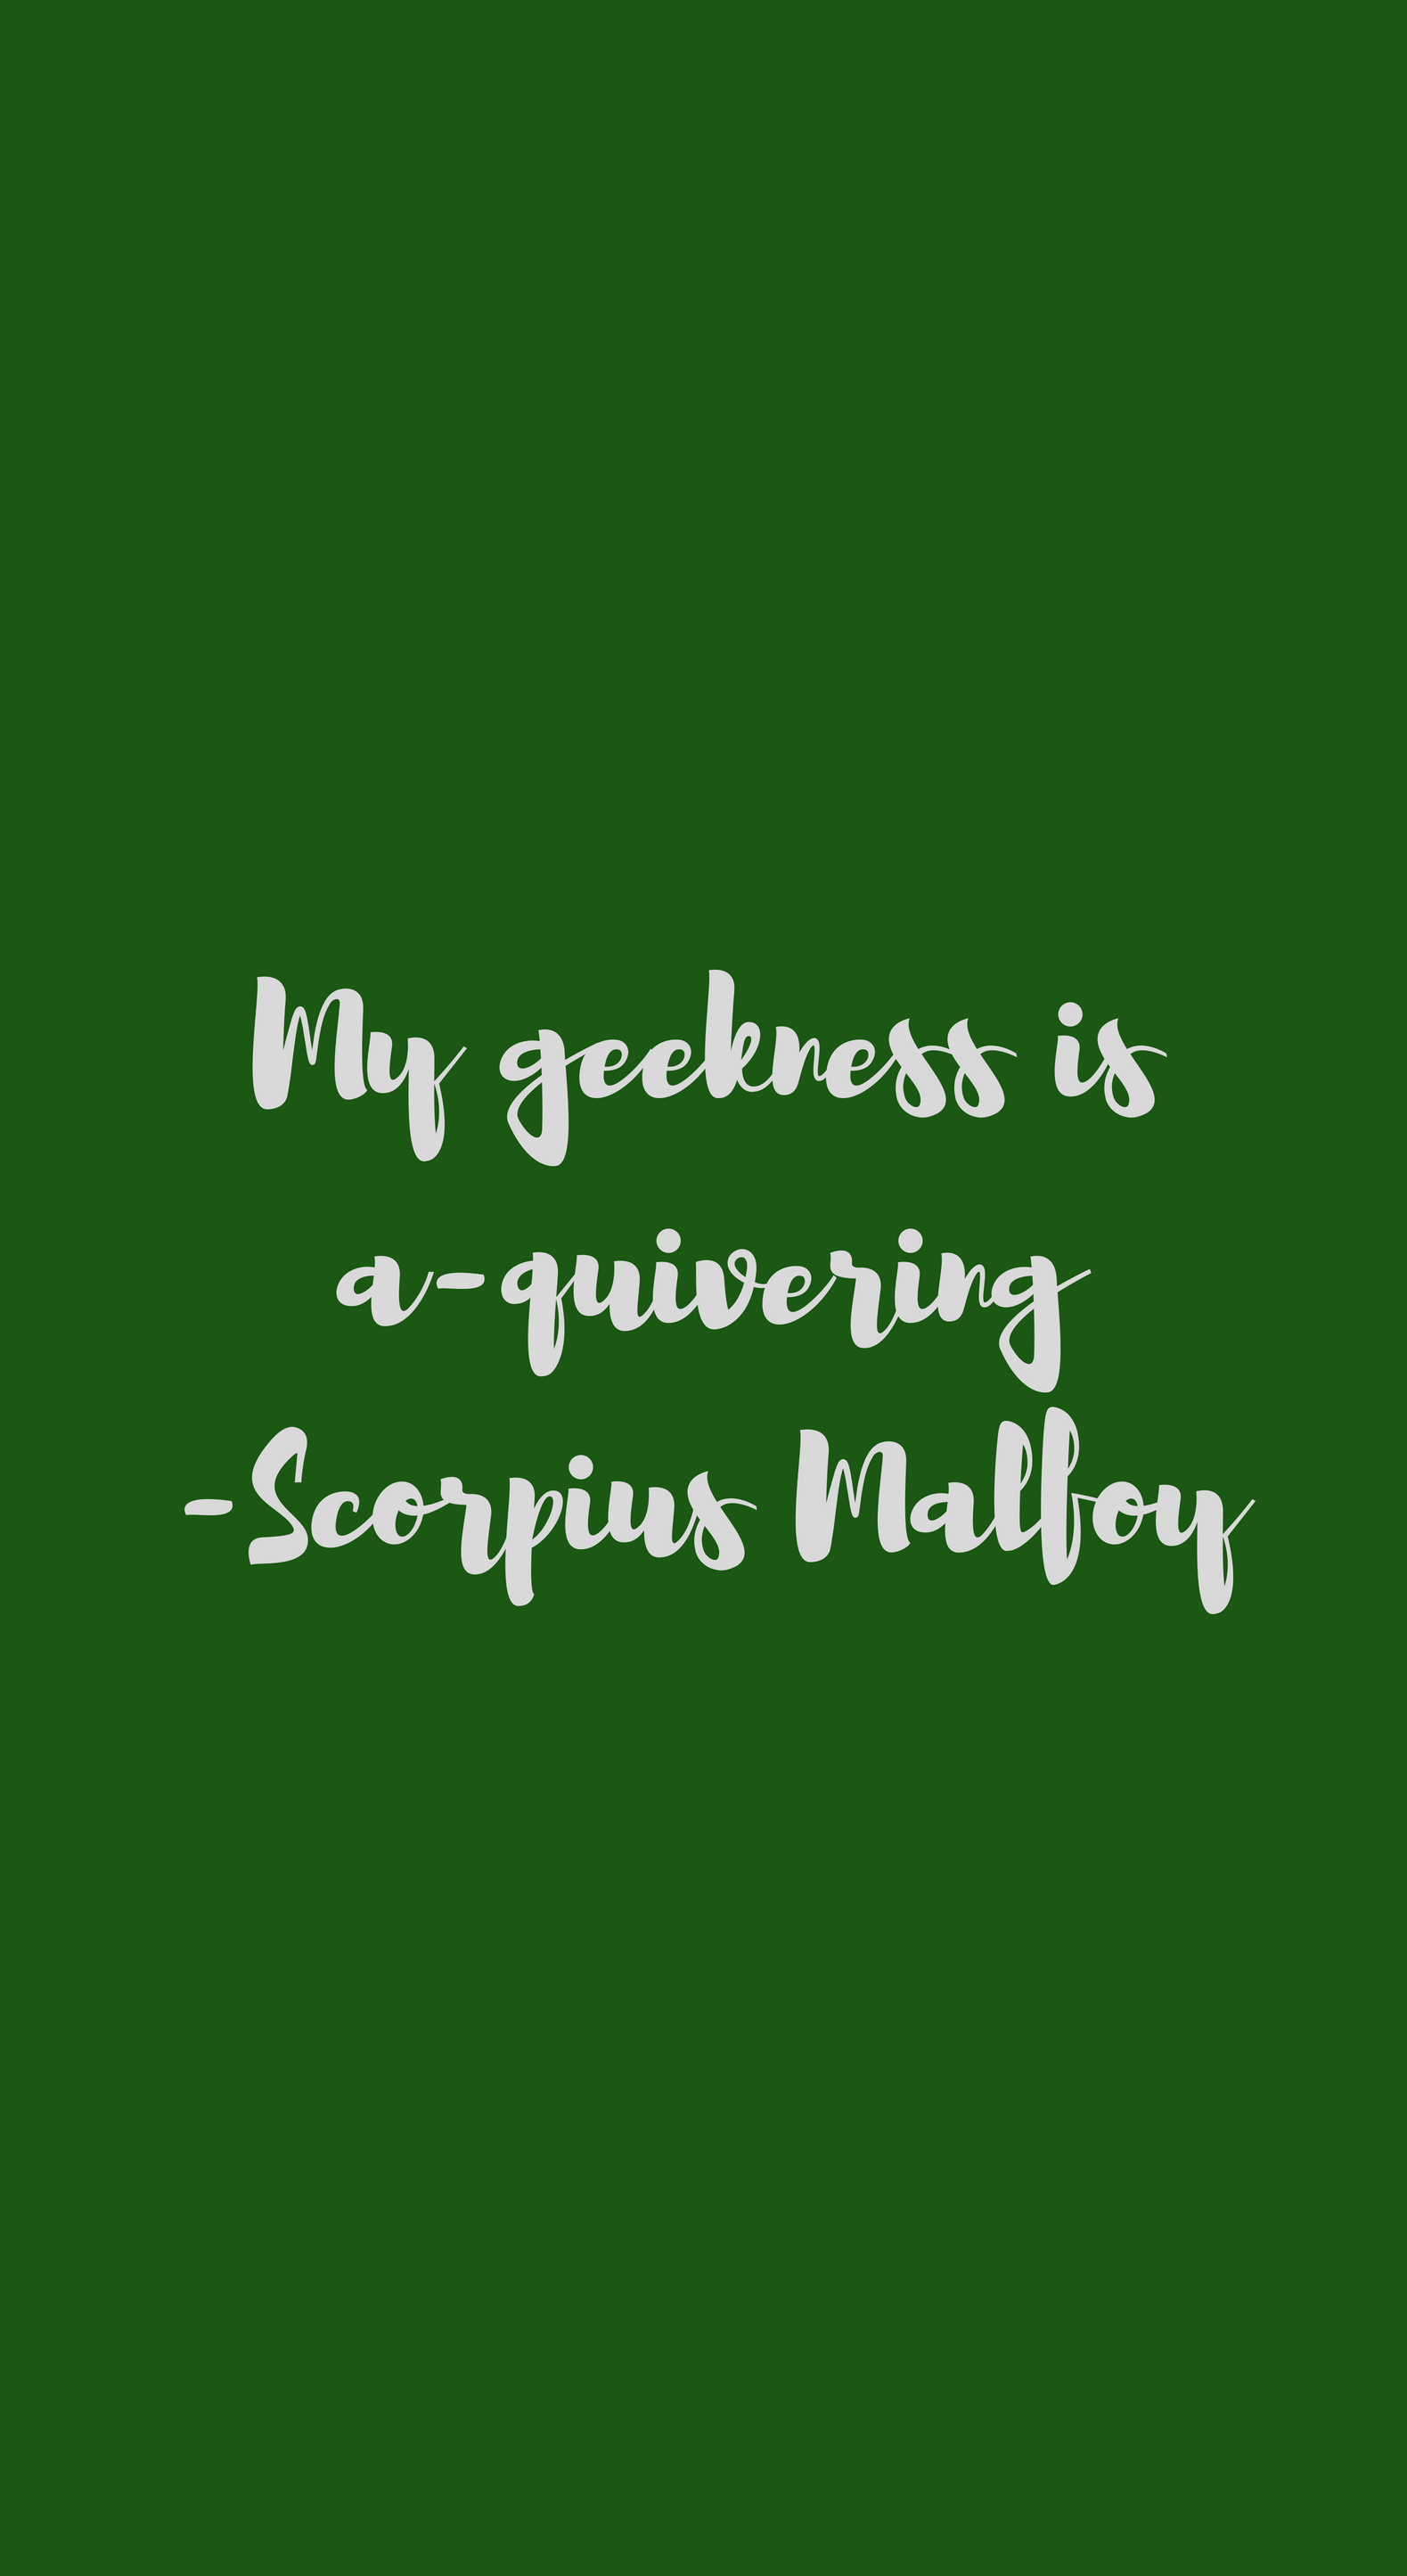 I Make My Own Wallpaper Scorpius Malfoy Quote For iPhone X